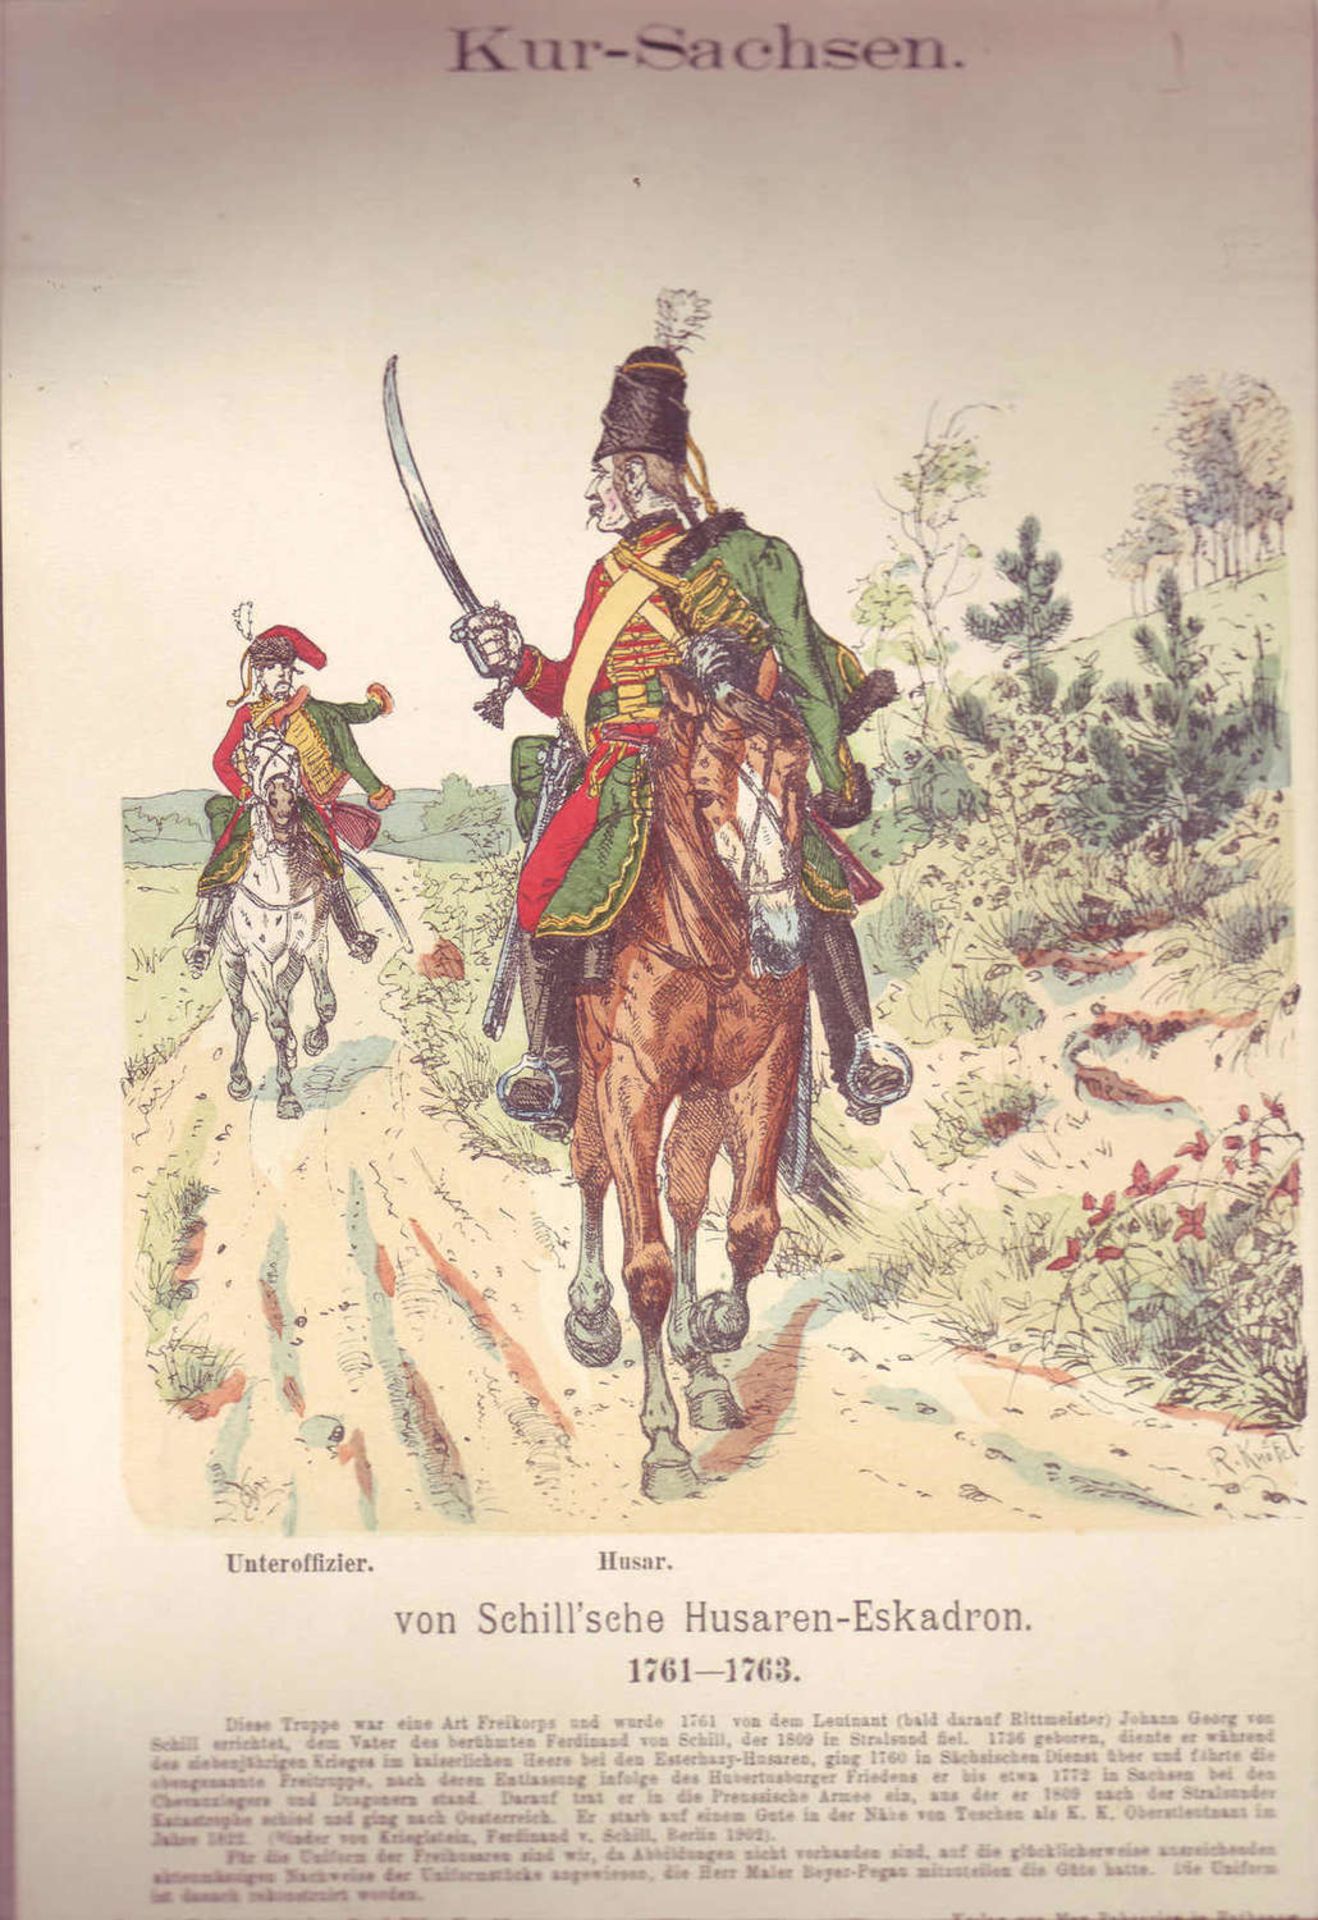 Kur-Sachsen, three copies of soldier paintings from the 18th century: cuirassier, hussar, officer - Image 2 of 3